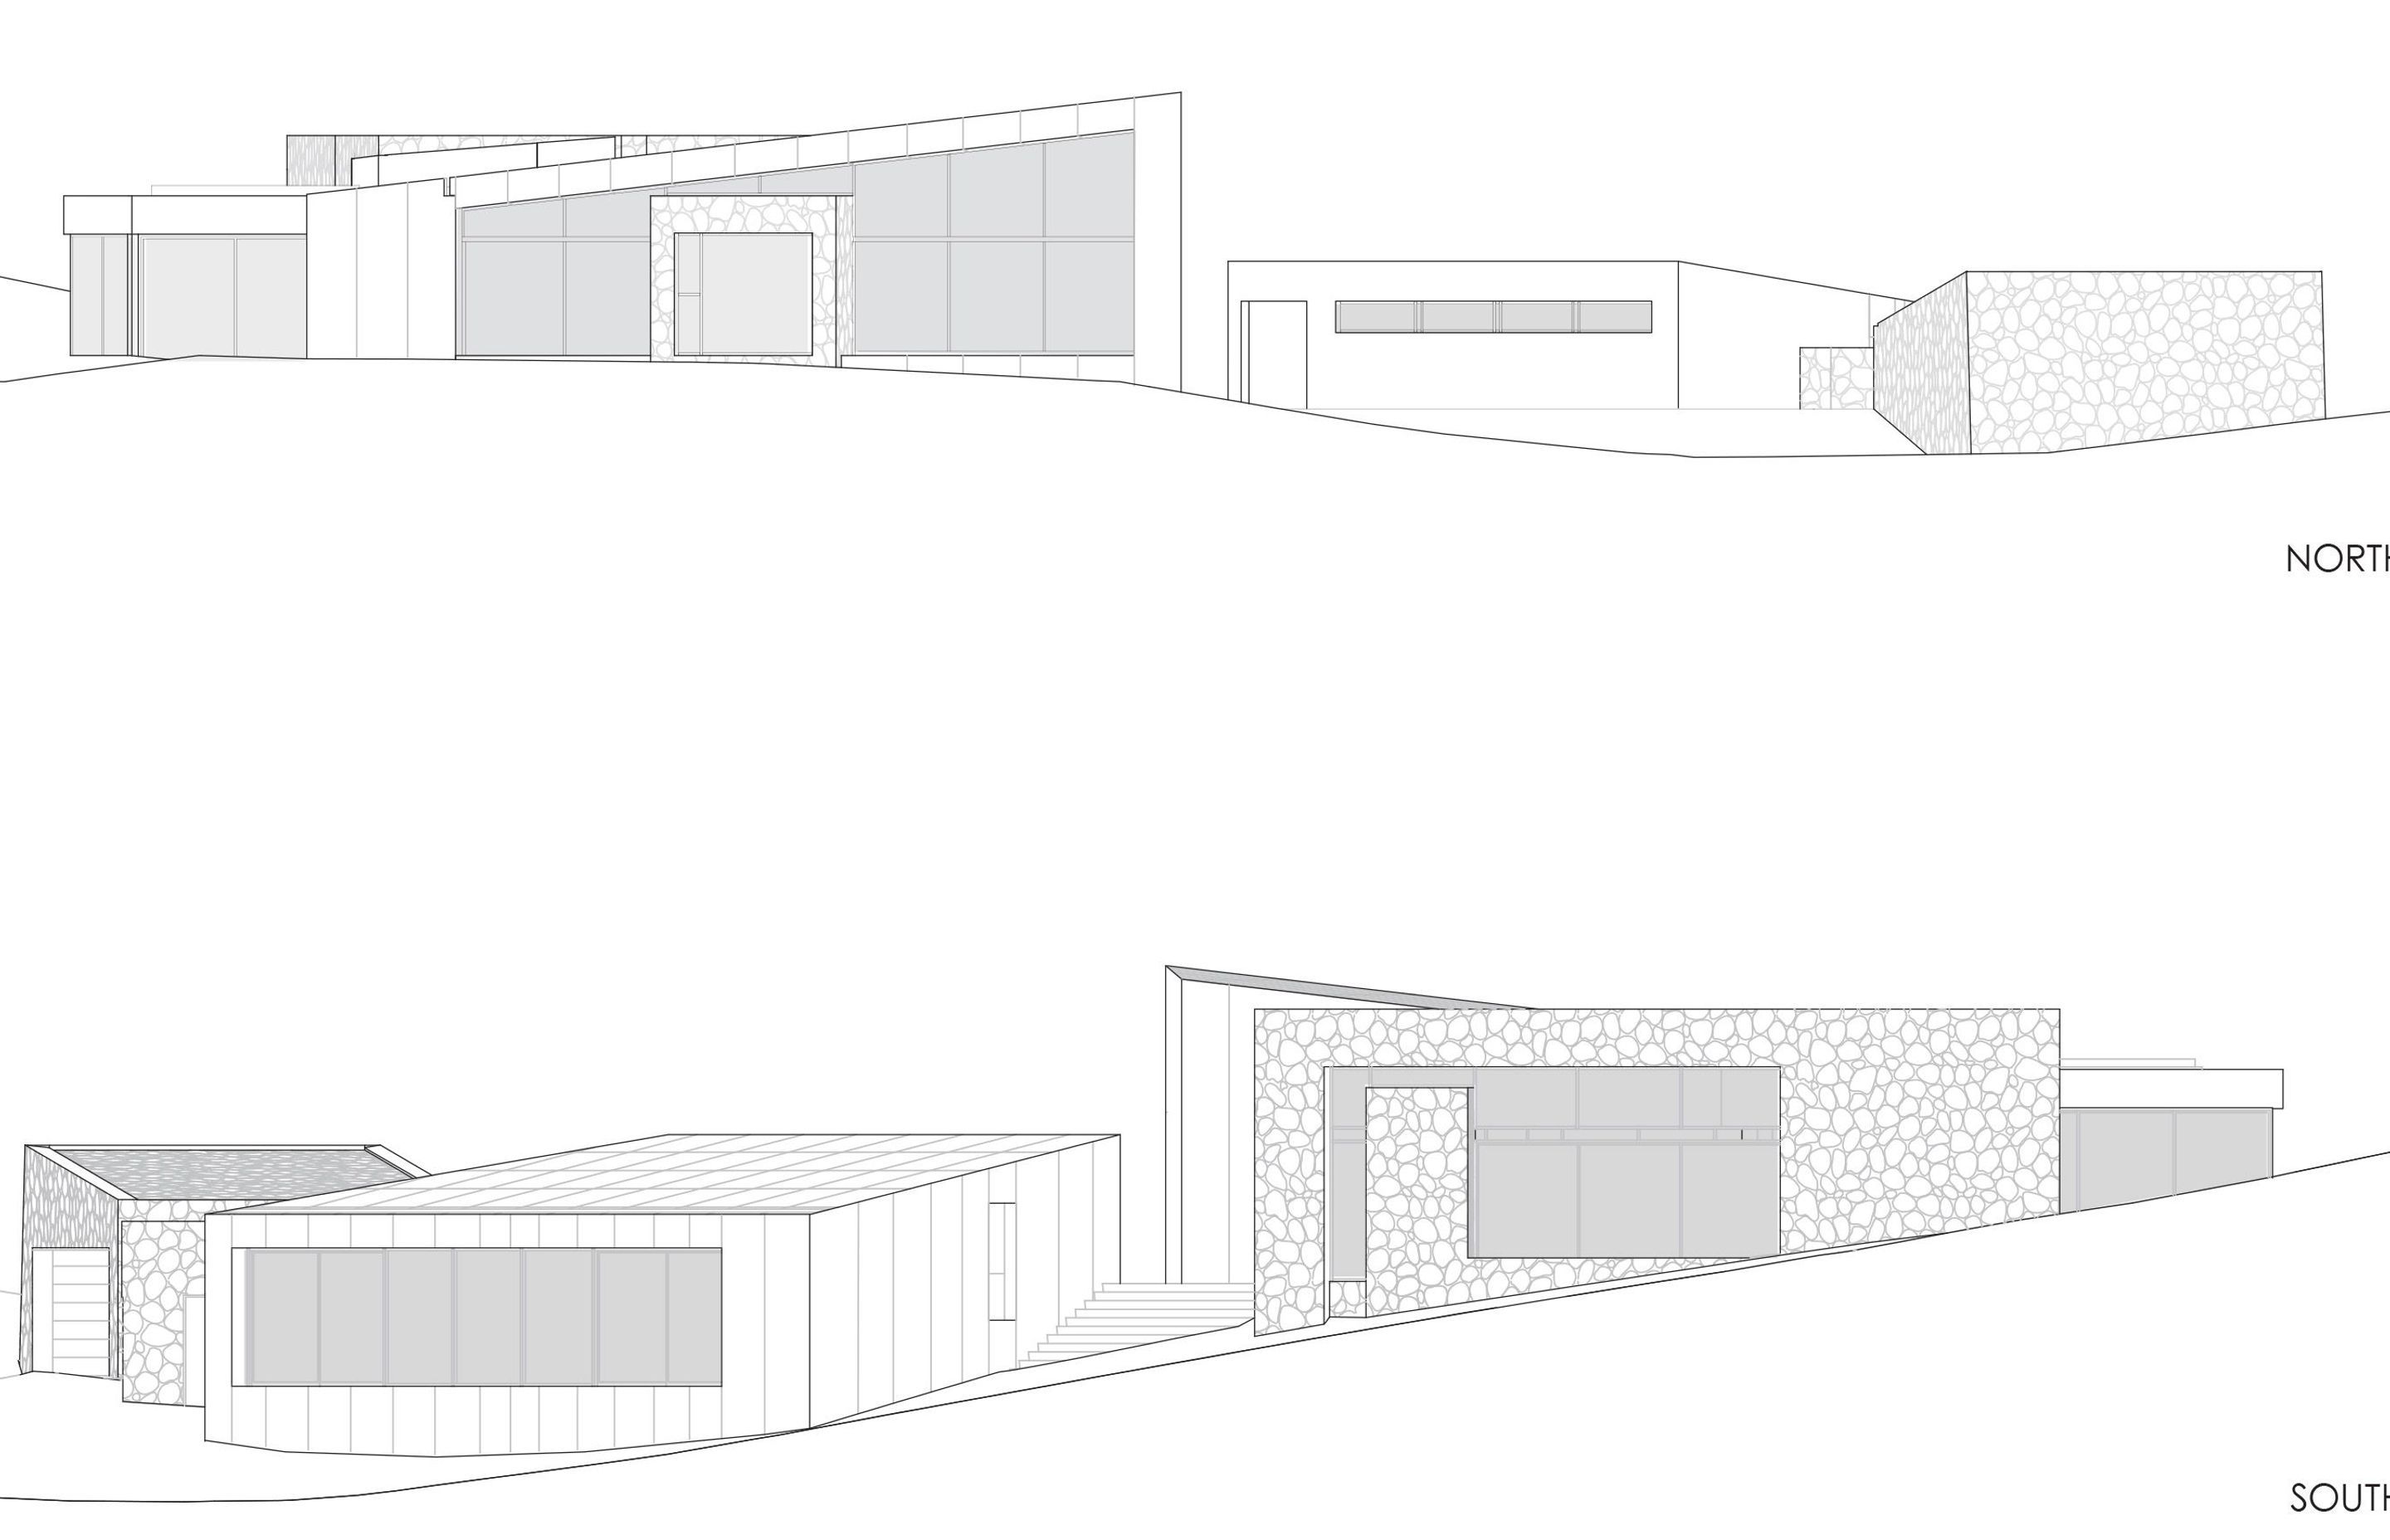 North- and south-facing elevations by RTA Studio.